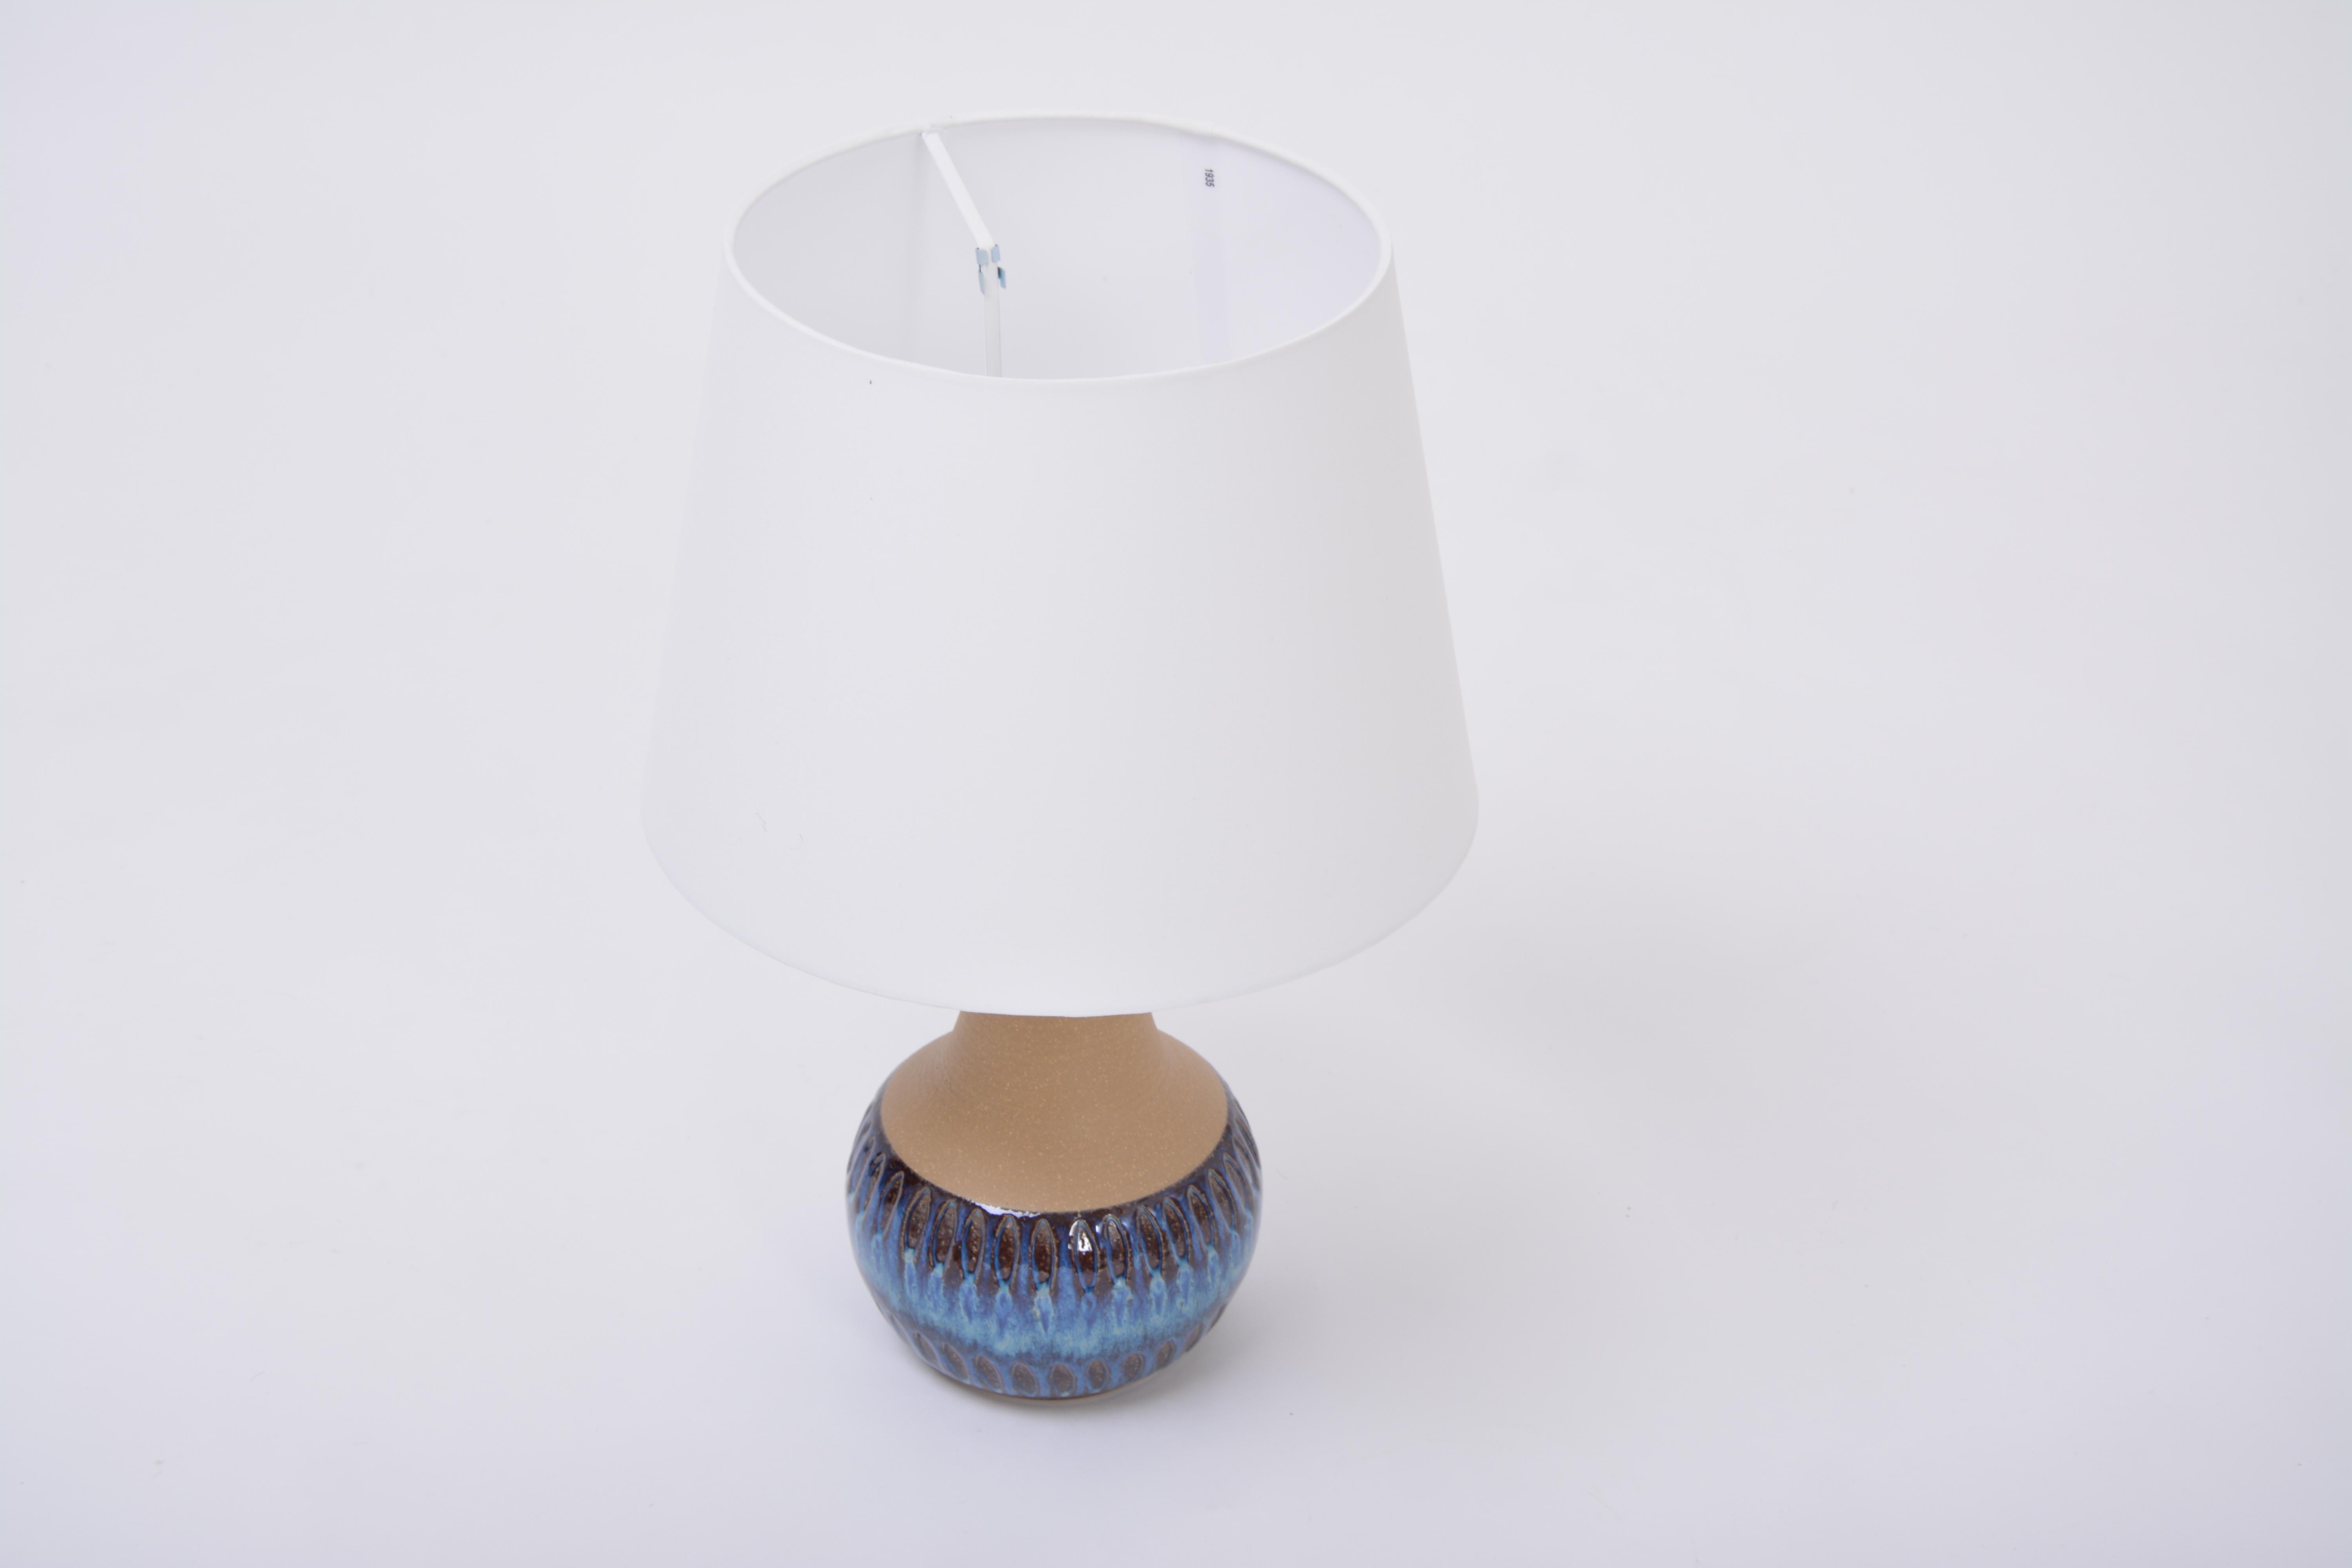 Soholm handmade Danish Mid-Century Modern stoneware lamp with blue ceramic base
Table lamp handmade of stoneware with ceramic glazing in tones of blue. Graphical pattern to the base of the lamp. Produced by Danish company Soholm. The lamp has been